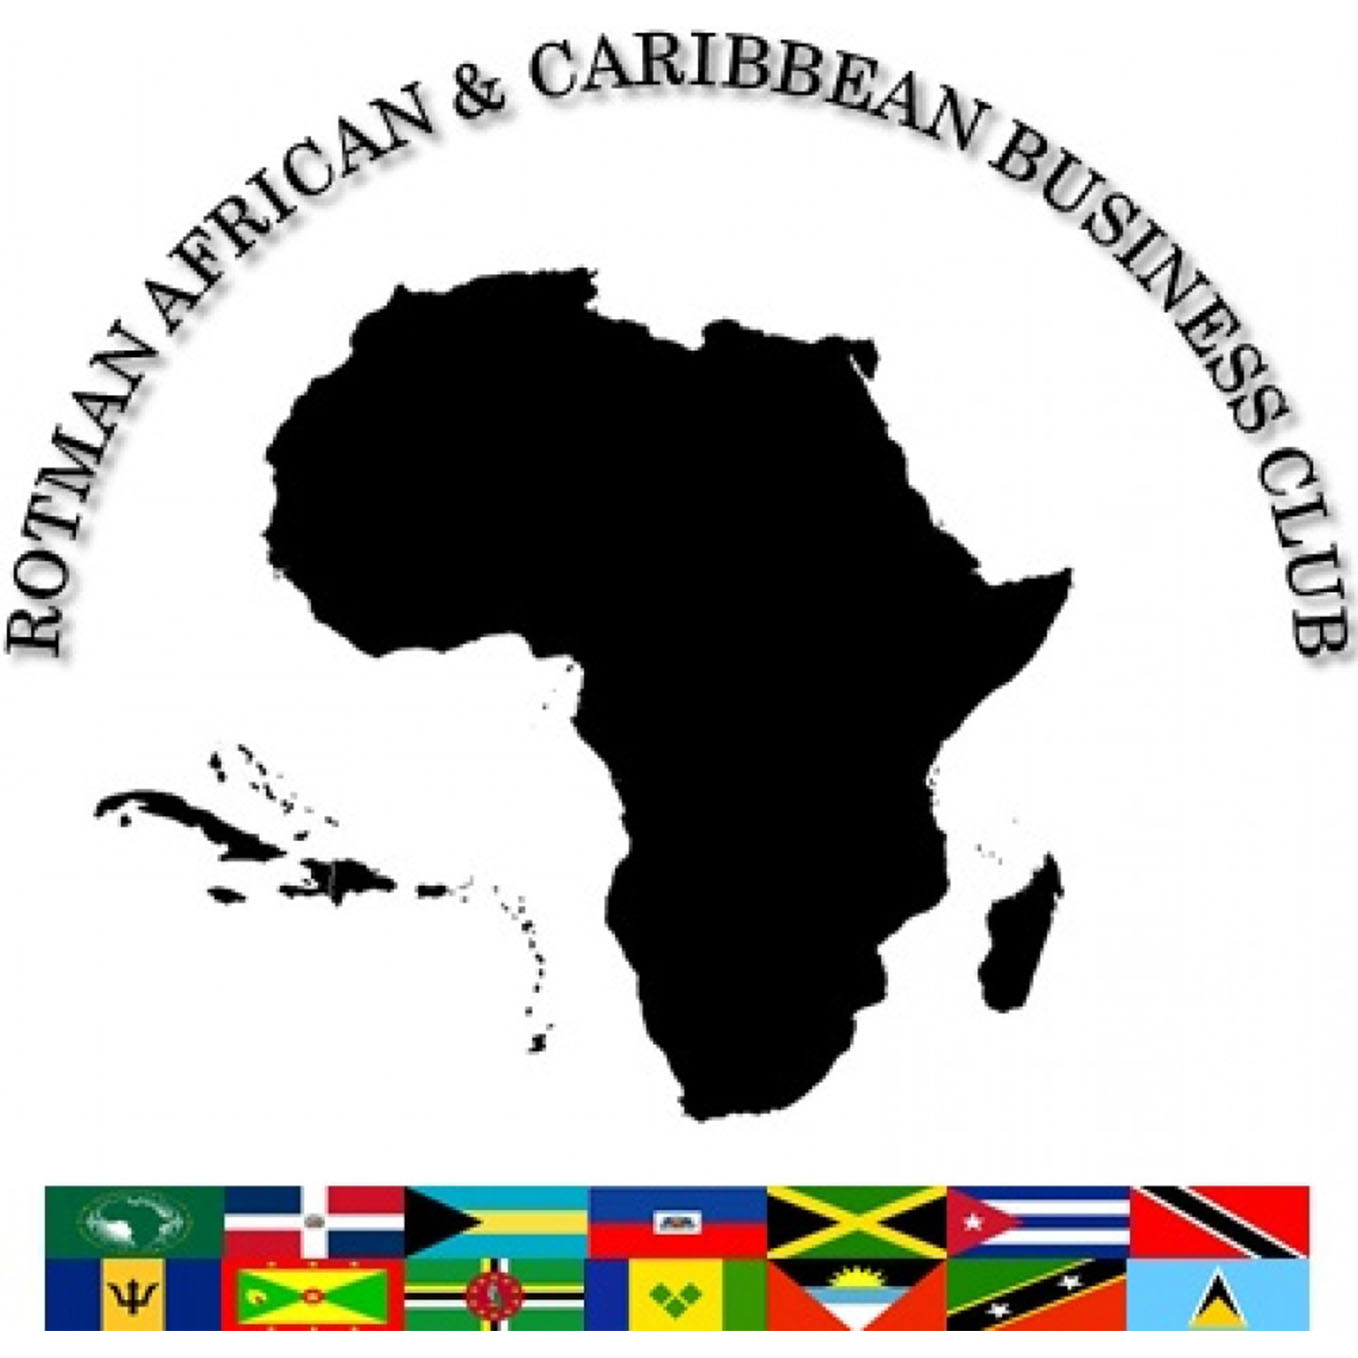 Rotman African and Caribbean Business Club